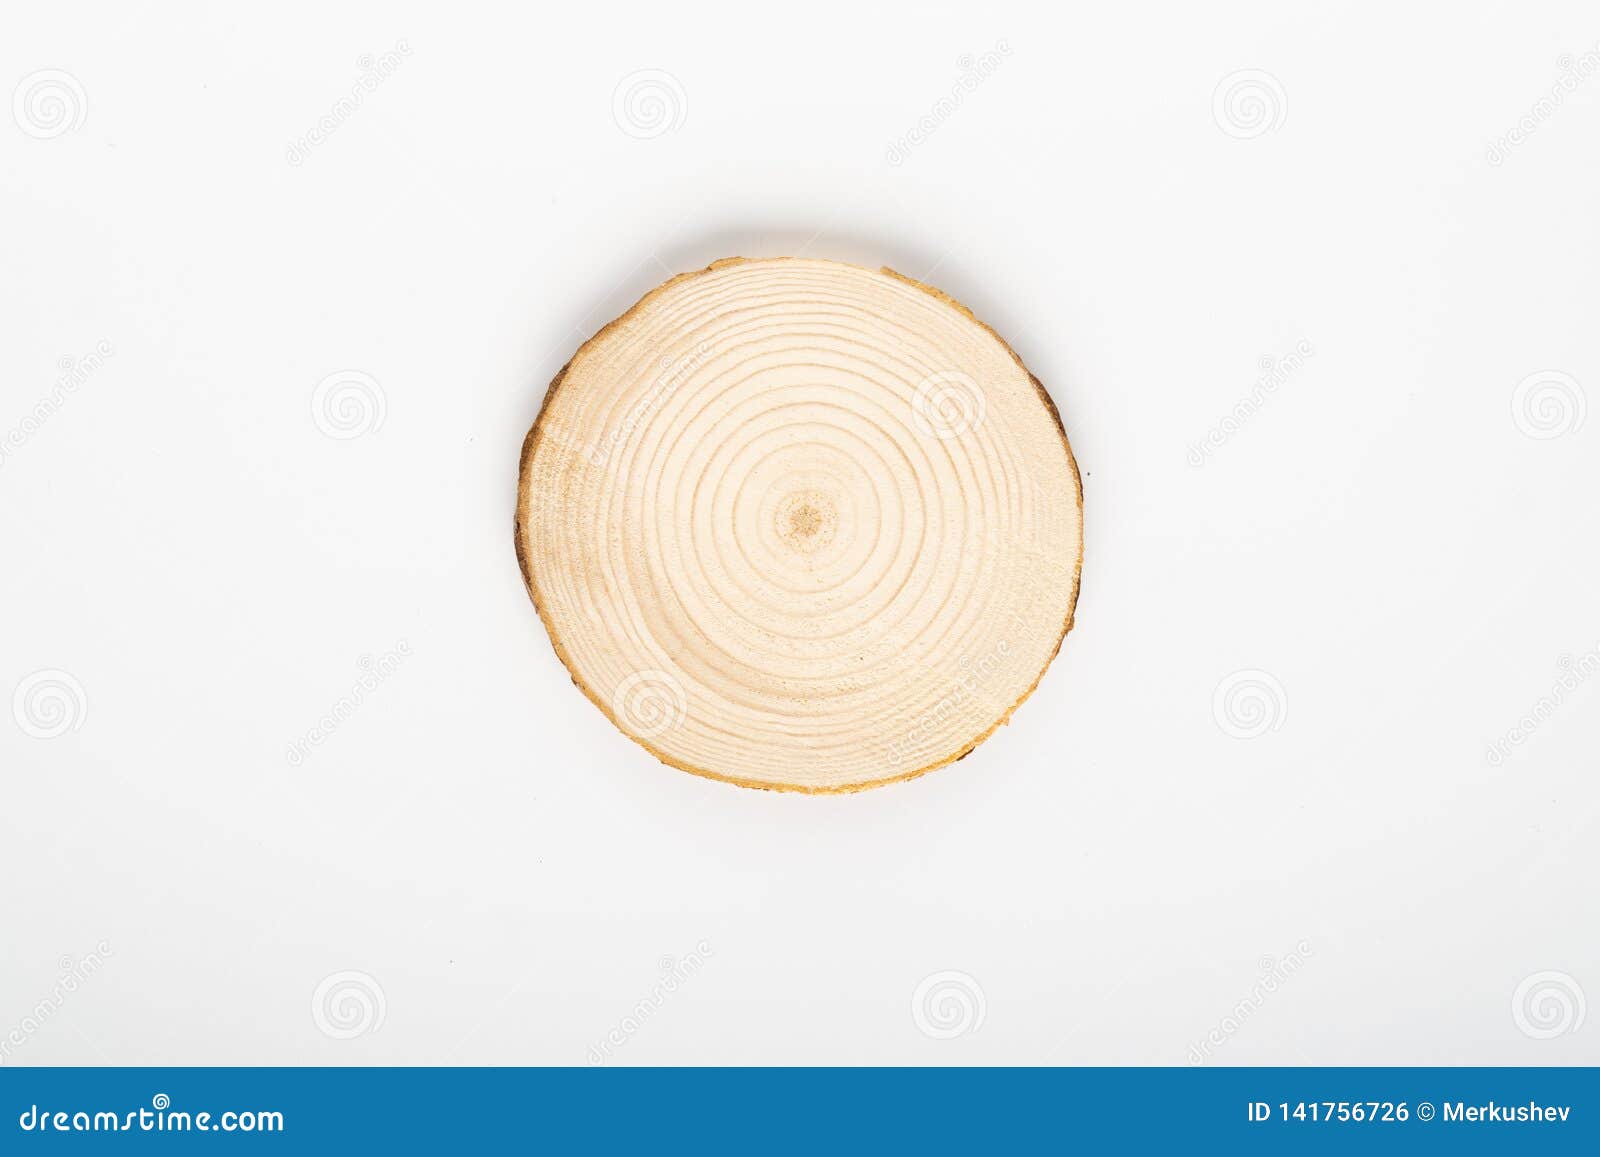 pine tree cross-section with annual rings on white background. lumber piece close-up, top view, .